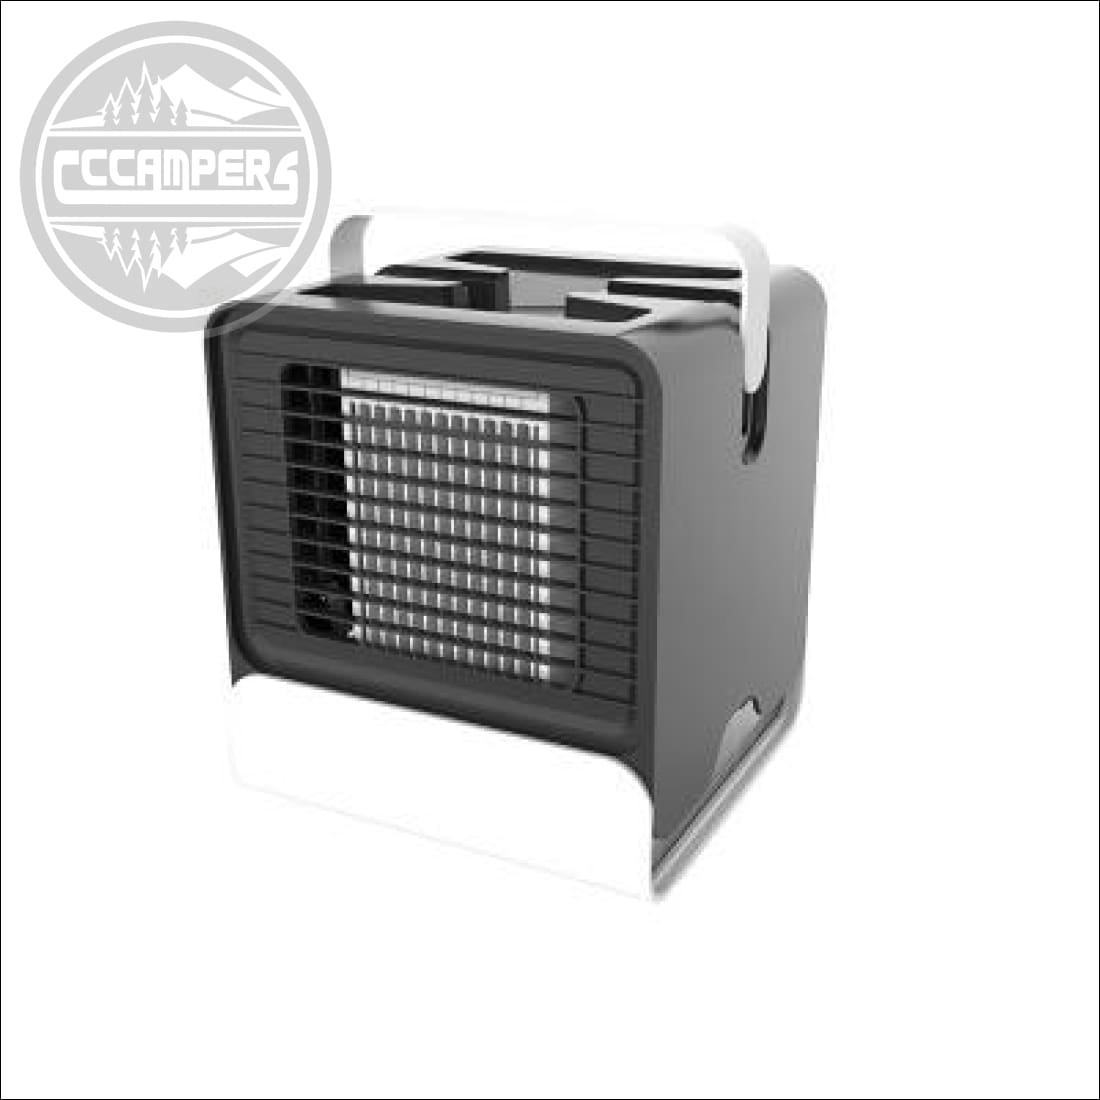 USB Air Conditioning / Humidifying Water Cooled Fan perfect for our lovely hot days and nights - cccampers.myshopify.com